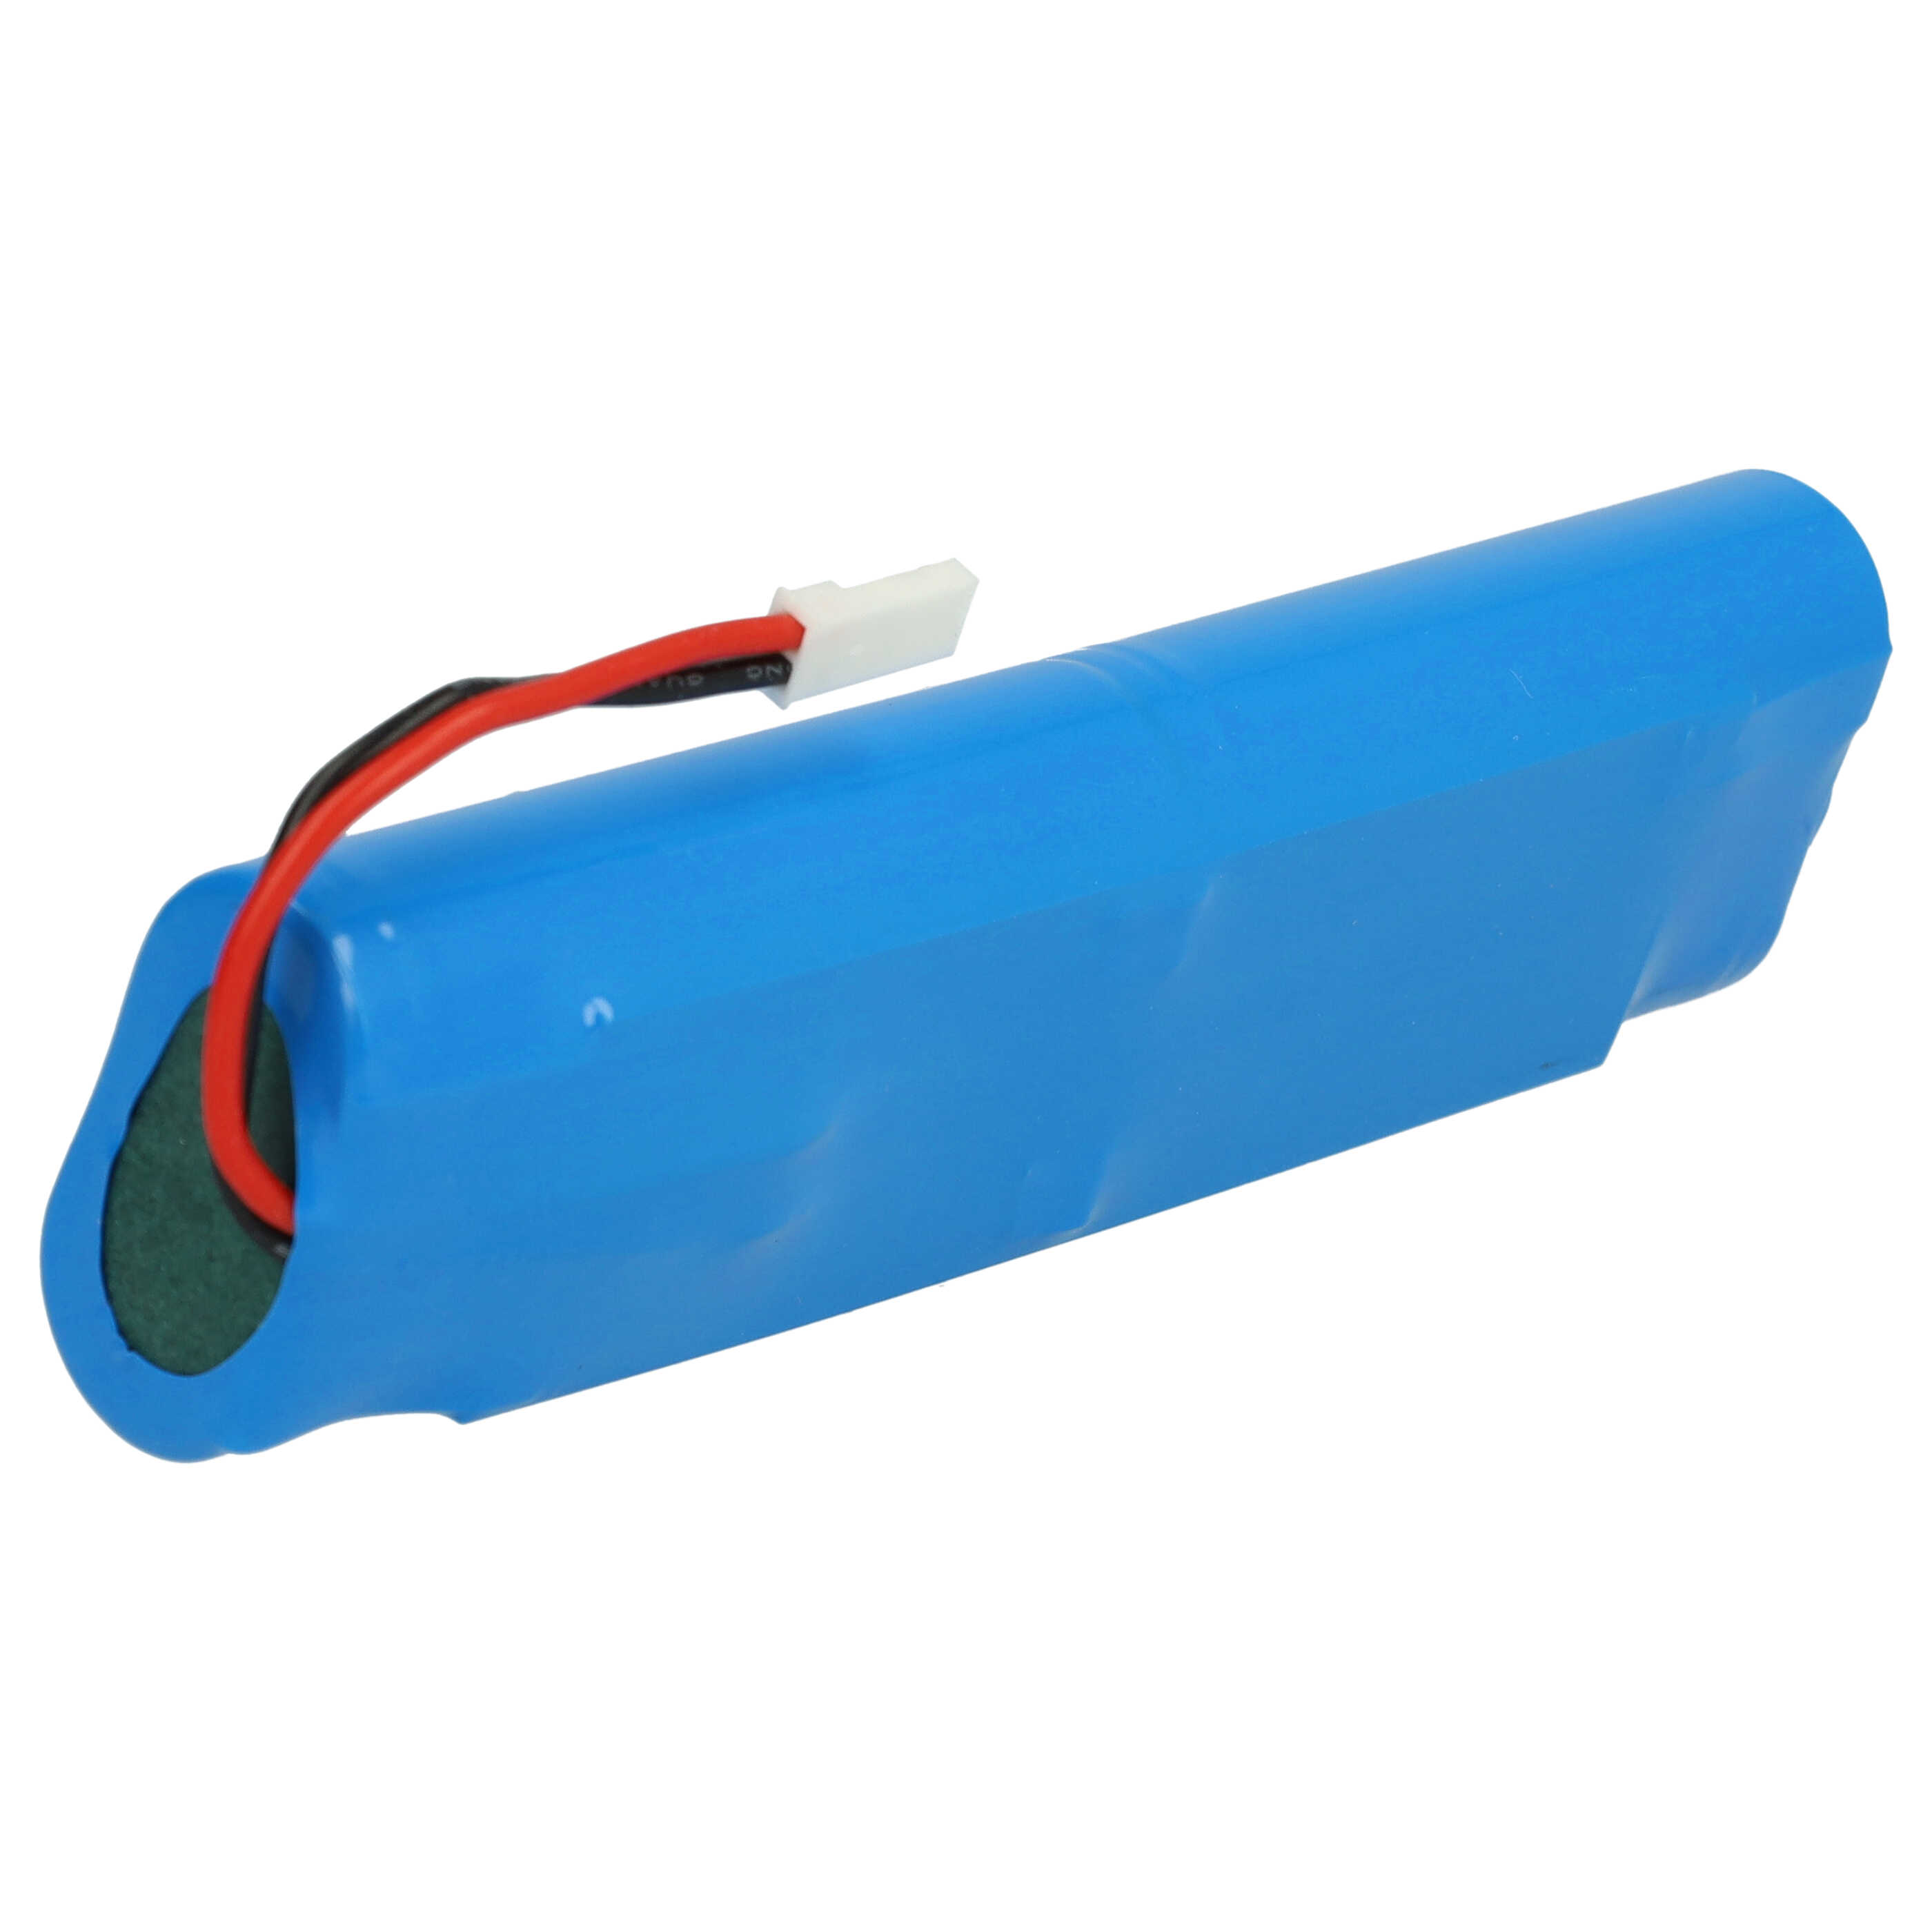 Battery Replacement for Ariete AT5186033510 for - 3400mAh, 14.4V, Li-Ion